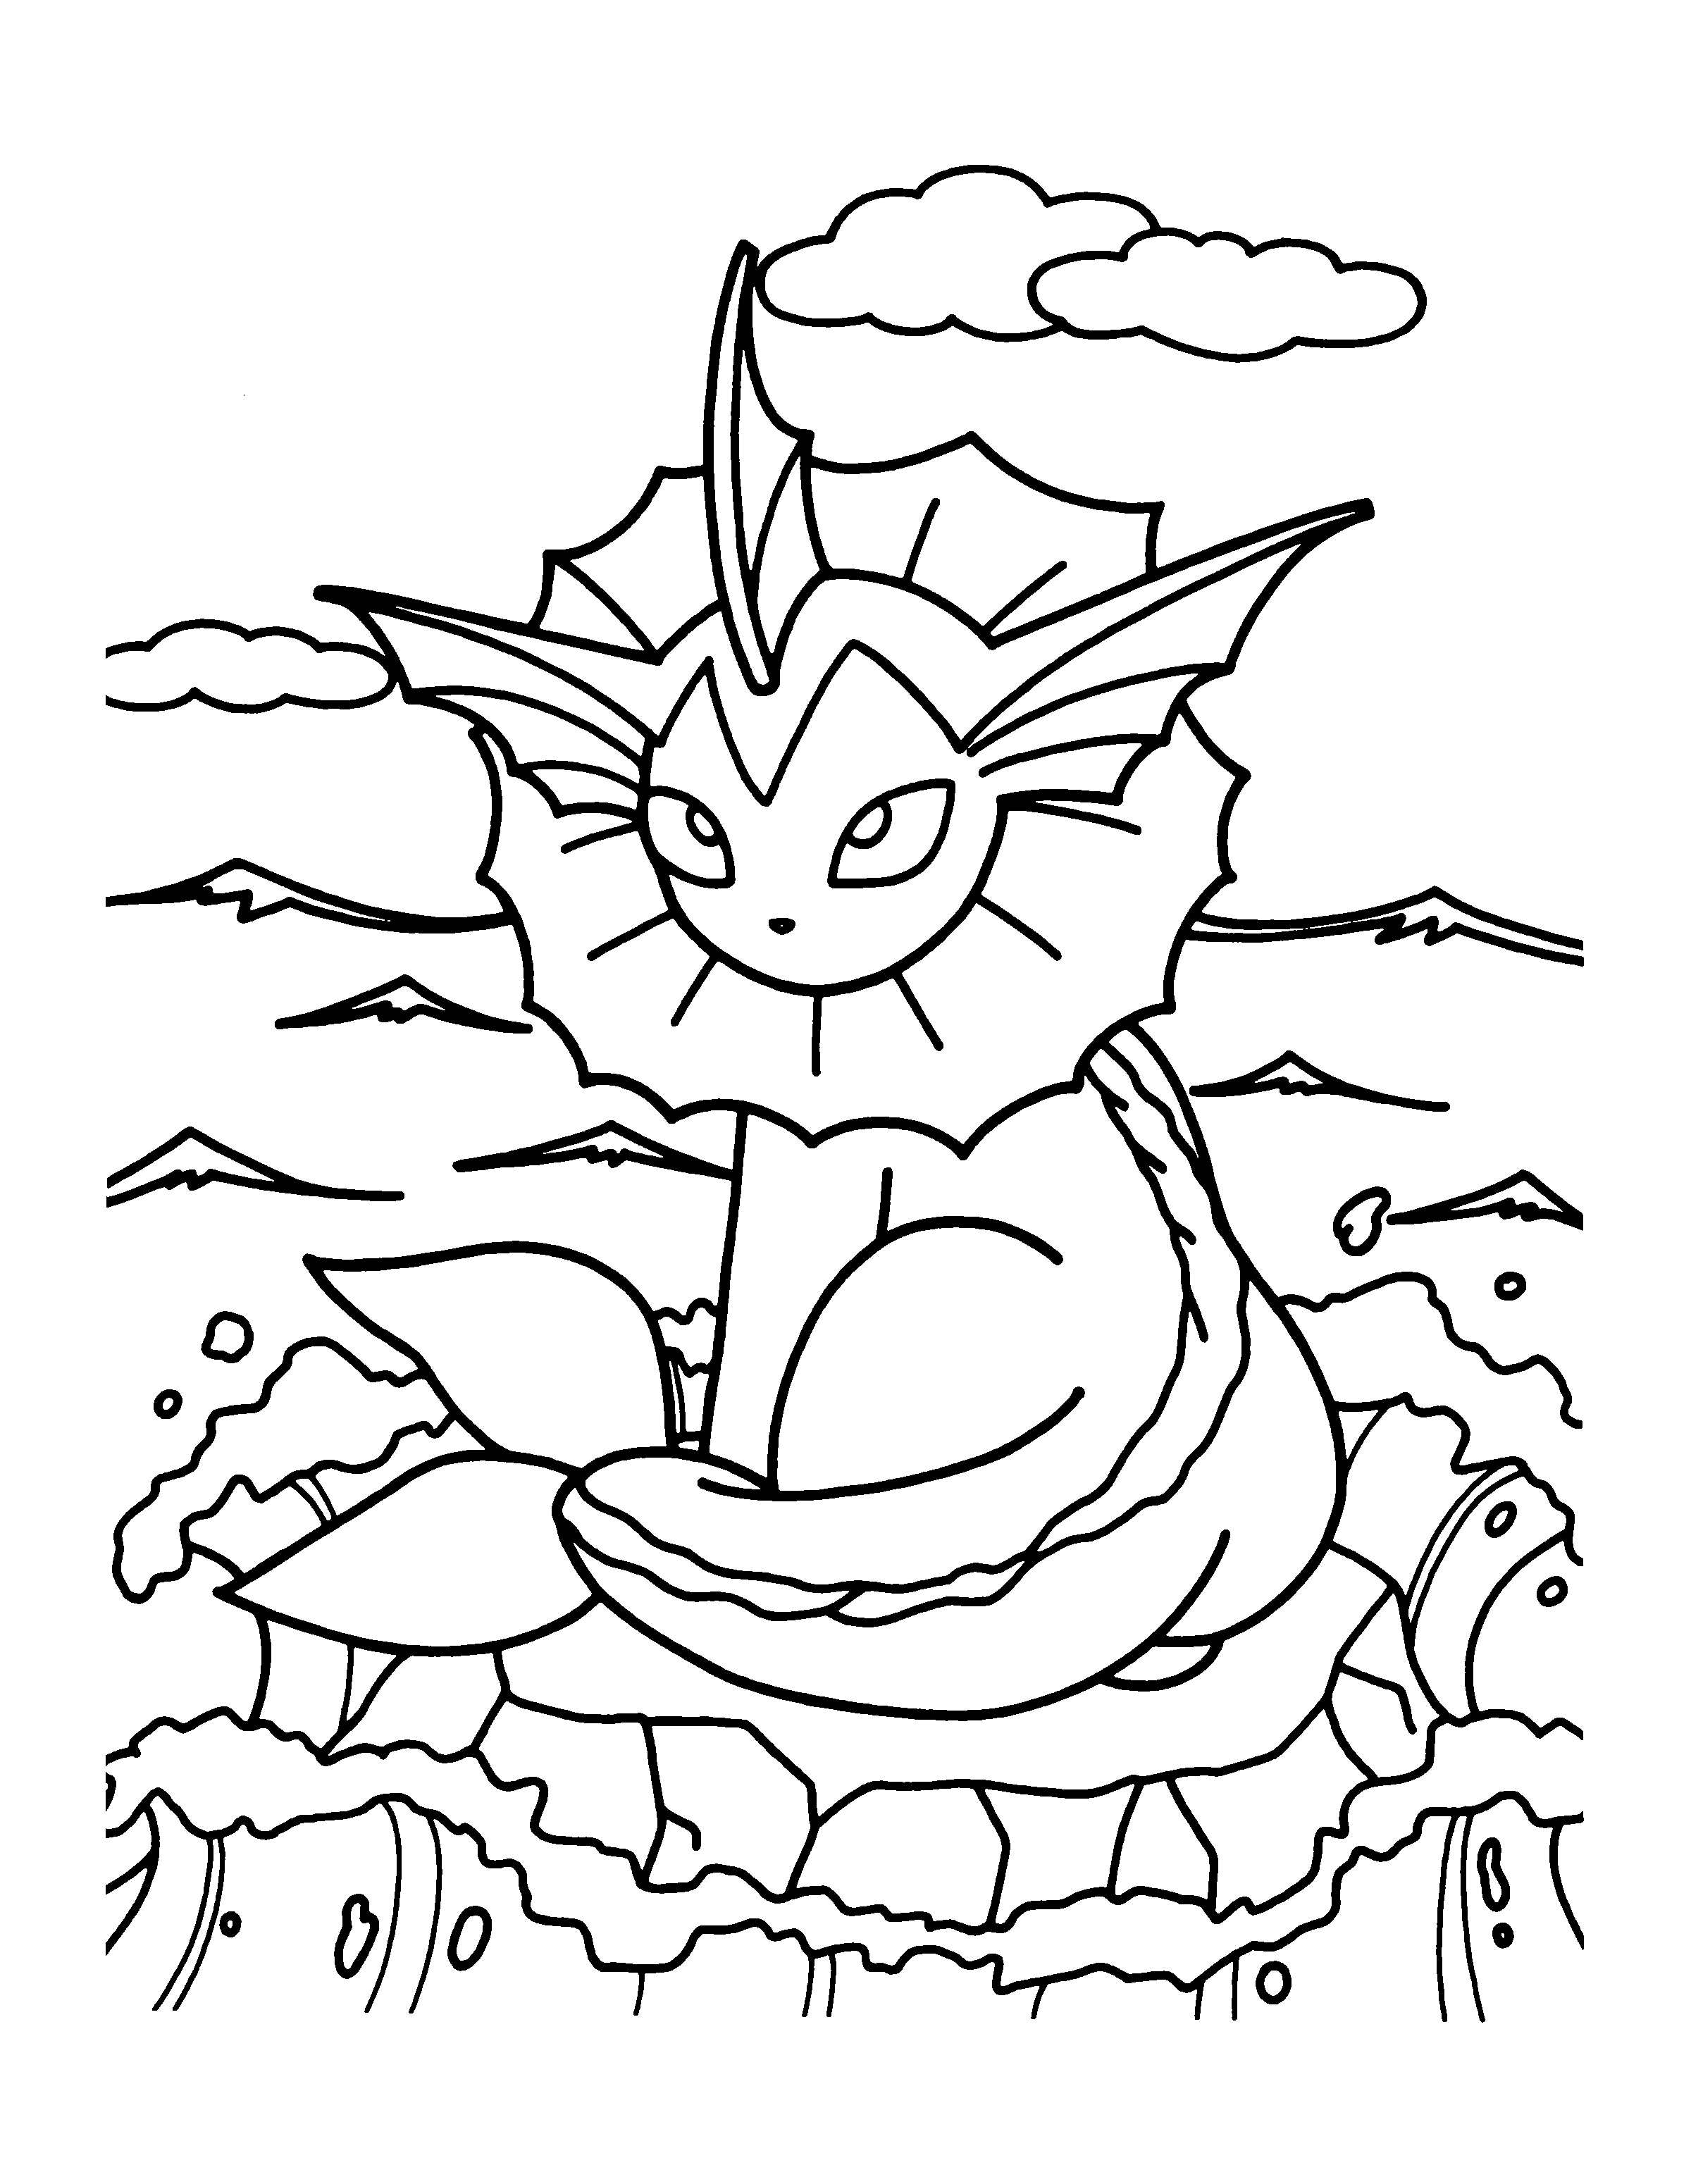 Pokemon Coloring Page Printable Pokemon Colouring Pages 13 576